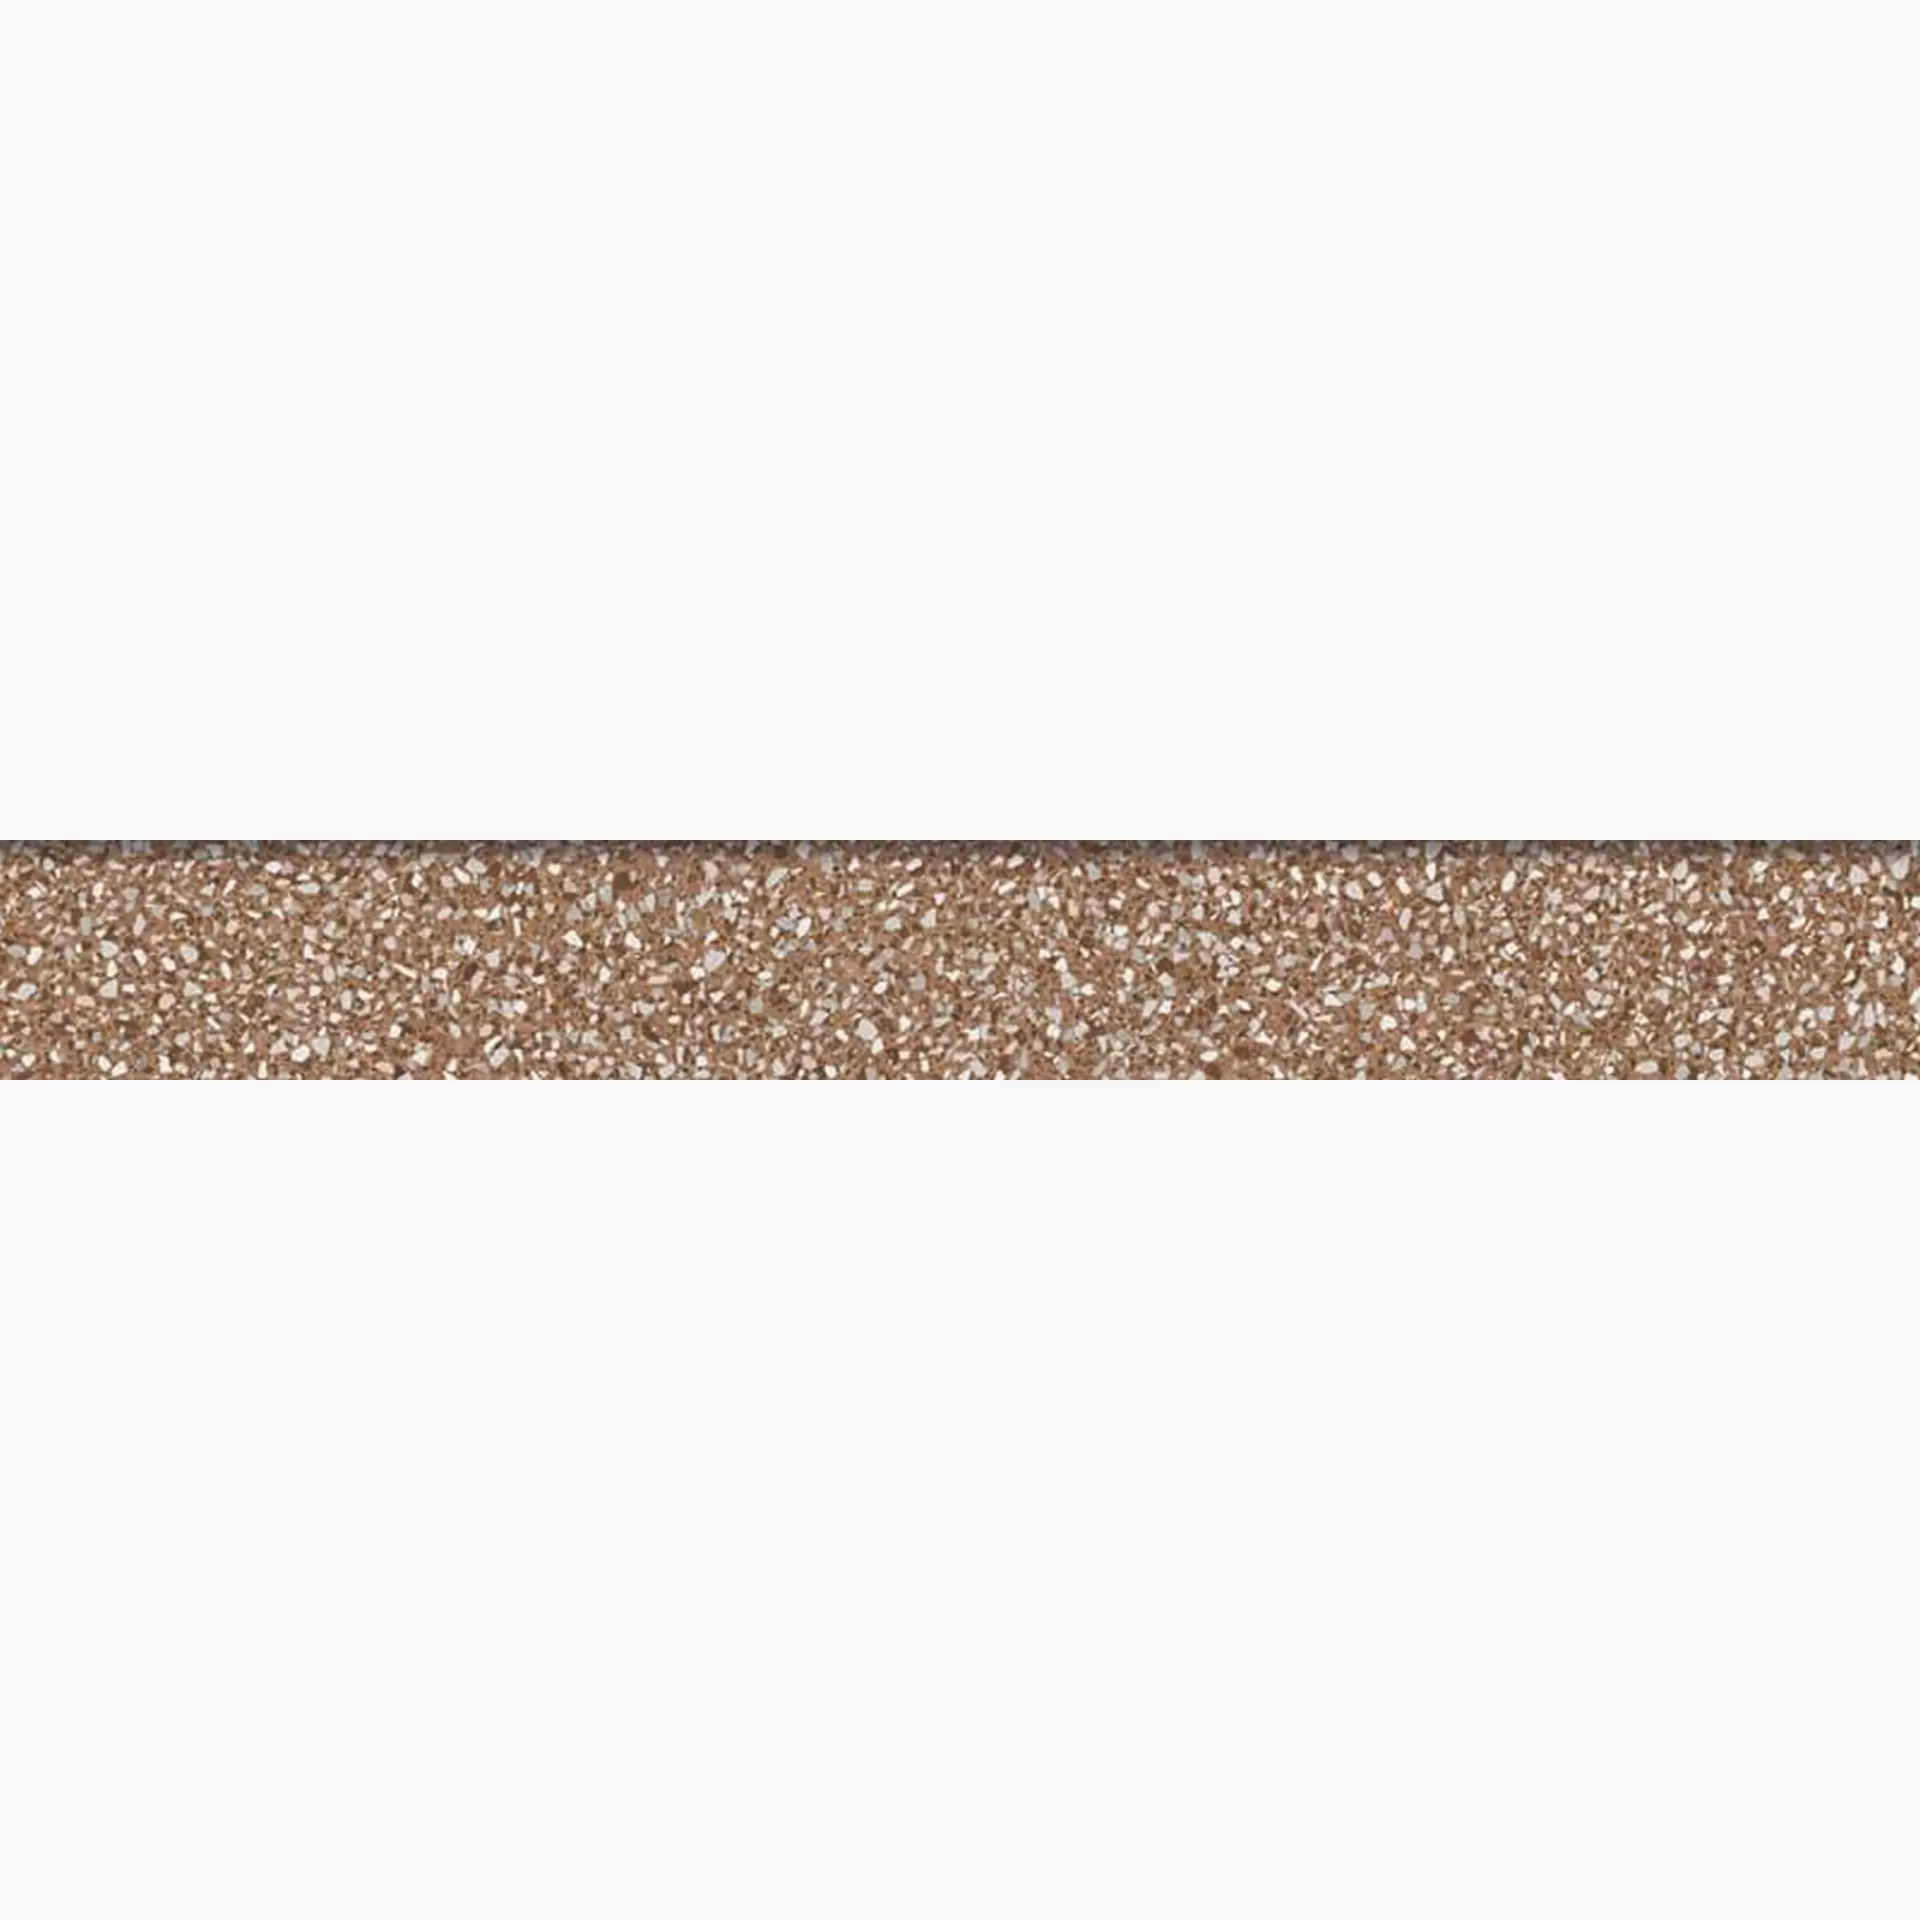 Sant Agostino Newdeco' Fire Levigato Skirting board CSABNDFL60 7,3x60cm rectified 10mm